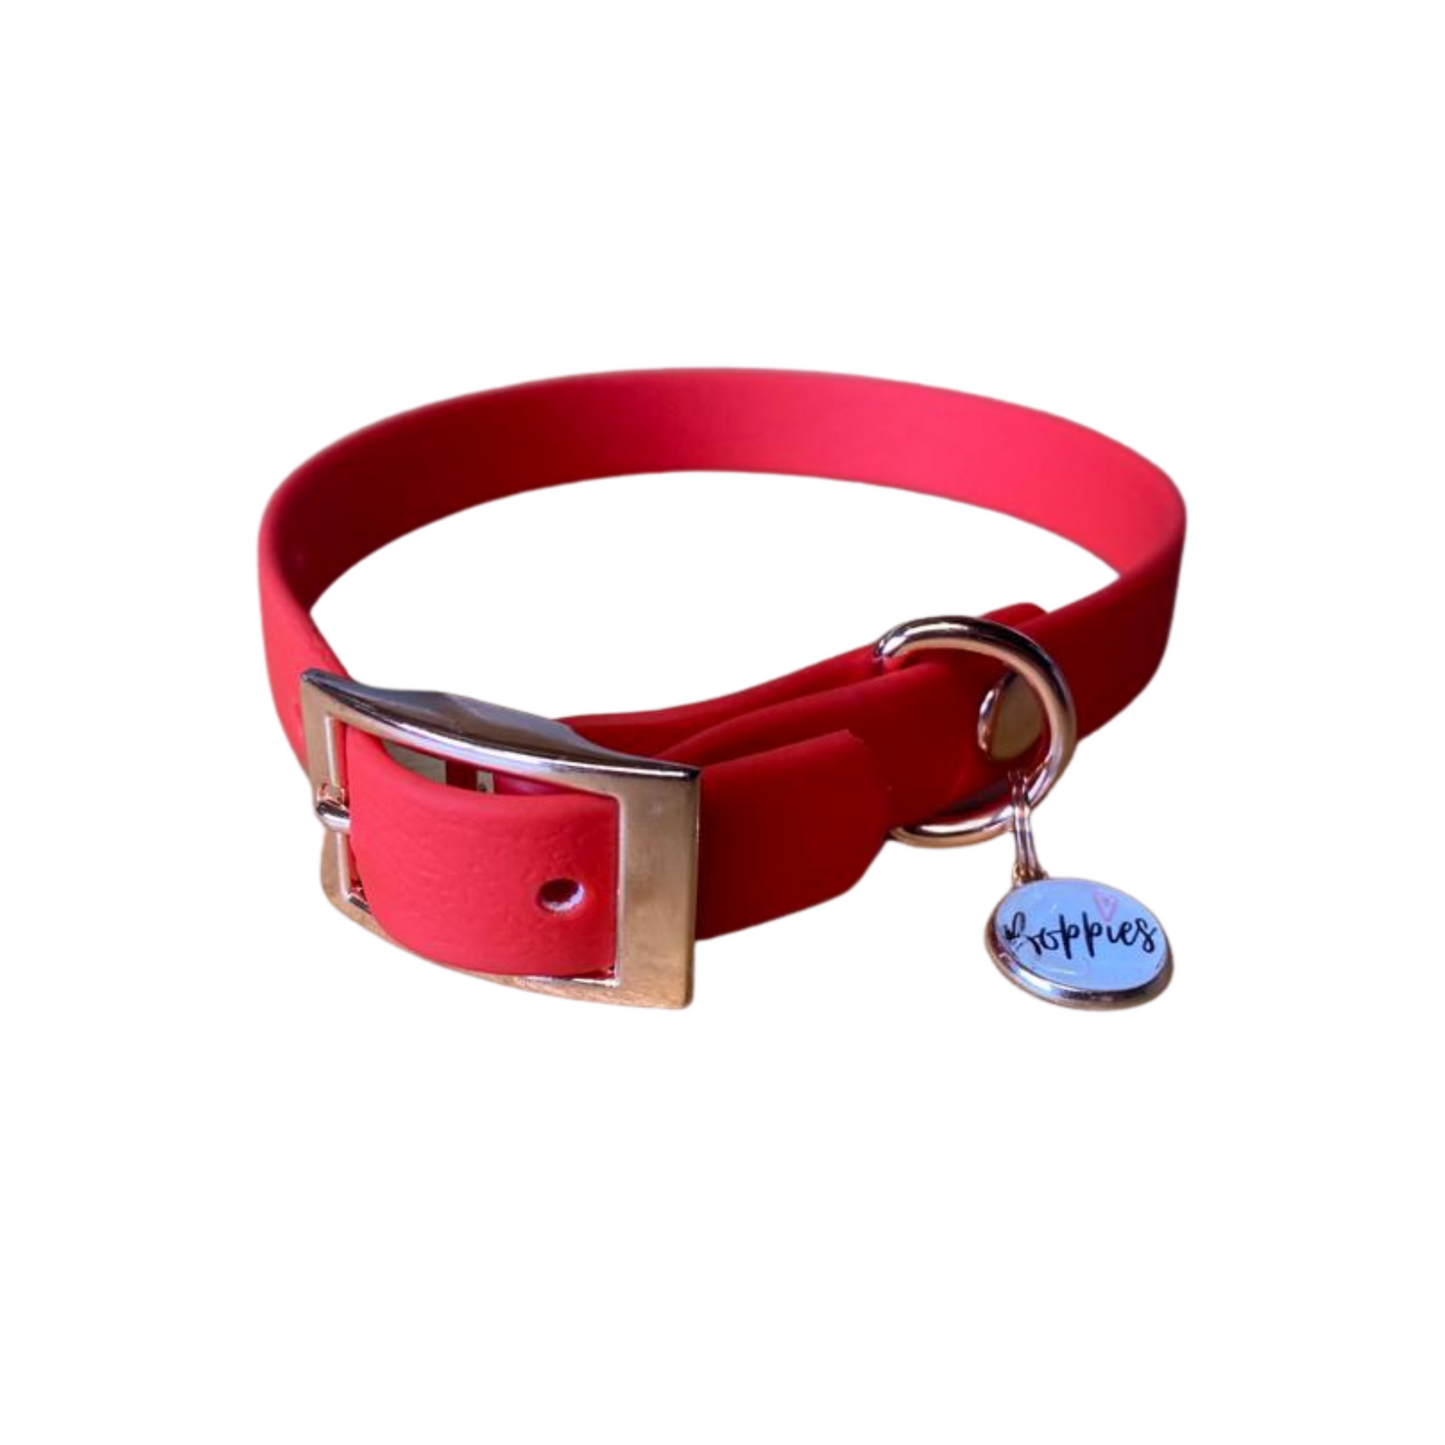 Red waterproof dog collar with rose gold hardware